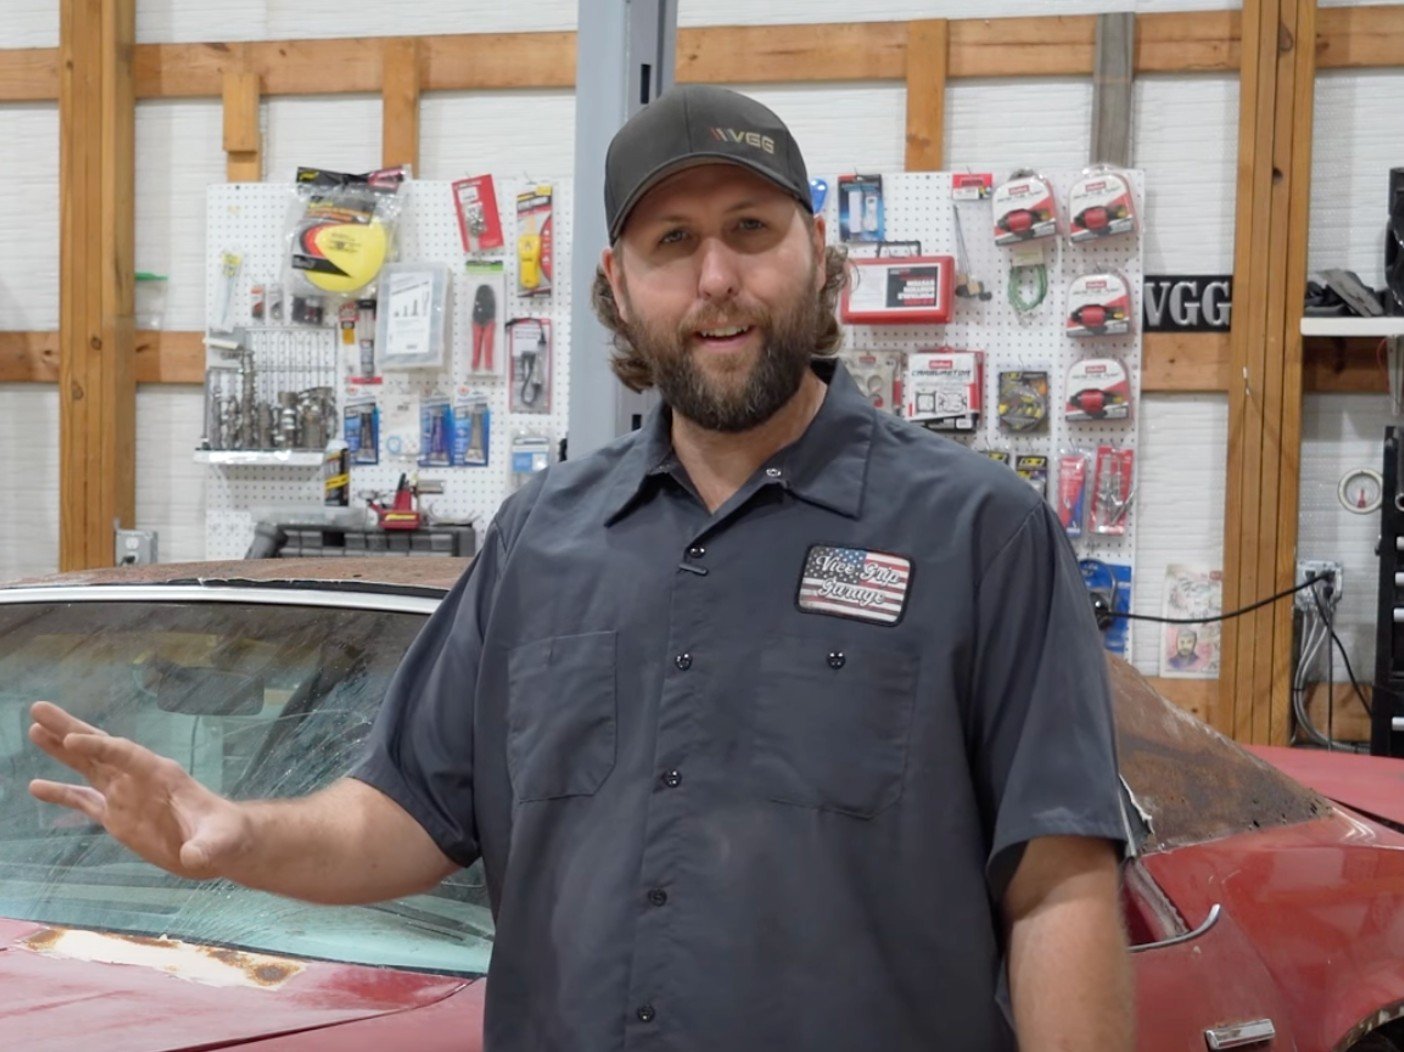 Why “Vice Grip Garage” Moved from Minnesota To Tennessee